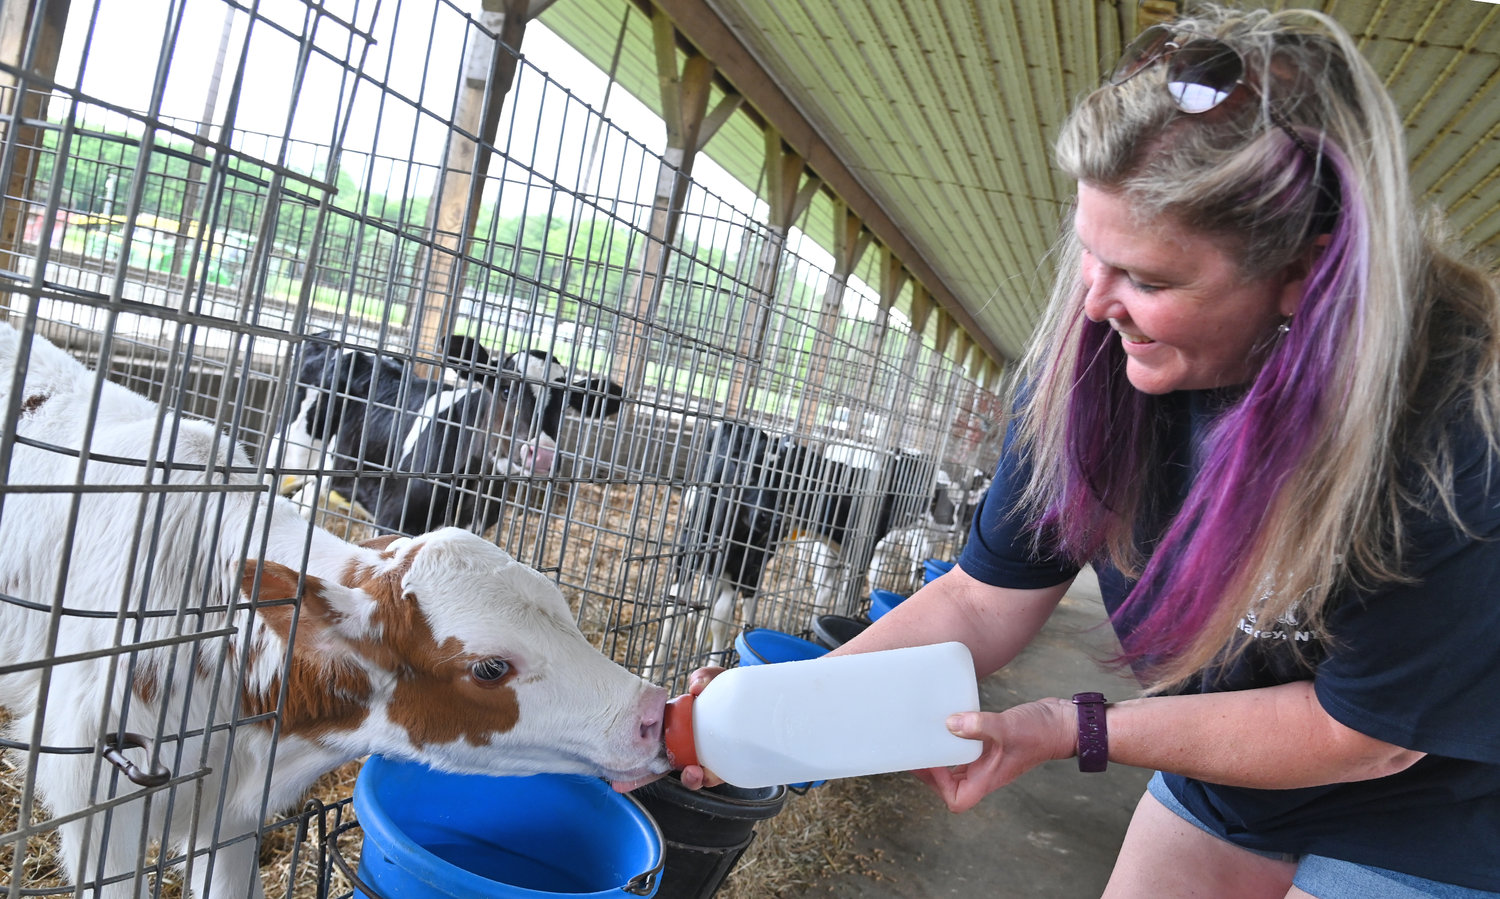 Terri DiNitto bottle feeds a calf at DiNitto Farms. The Marcy farm will once again host Farm Fest this Friday from 4:30 to 8:30 p.m. The popular event —— returning in person after a two-year COVID hiatus — helps to show and engage local residents with a variety of demonstrations and activities to highlight local agriculture.